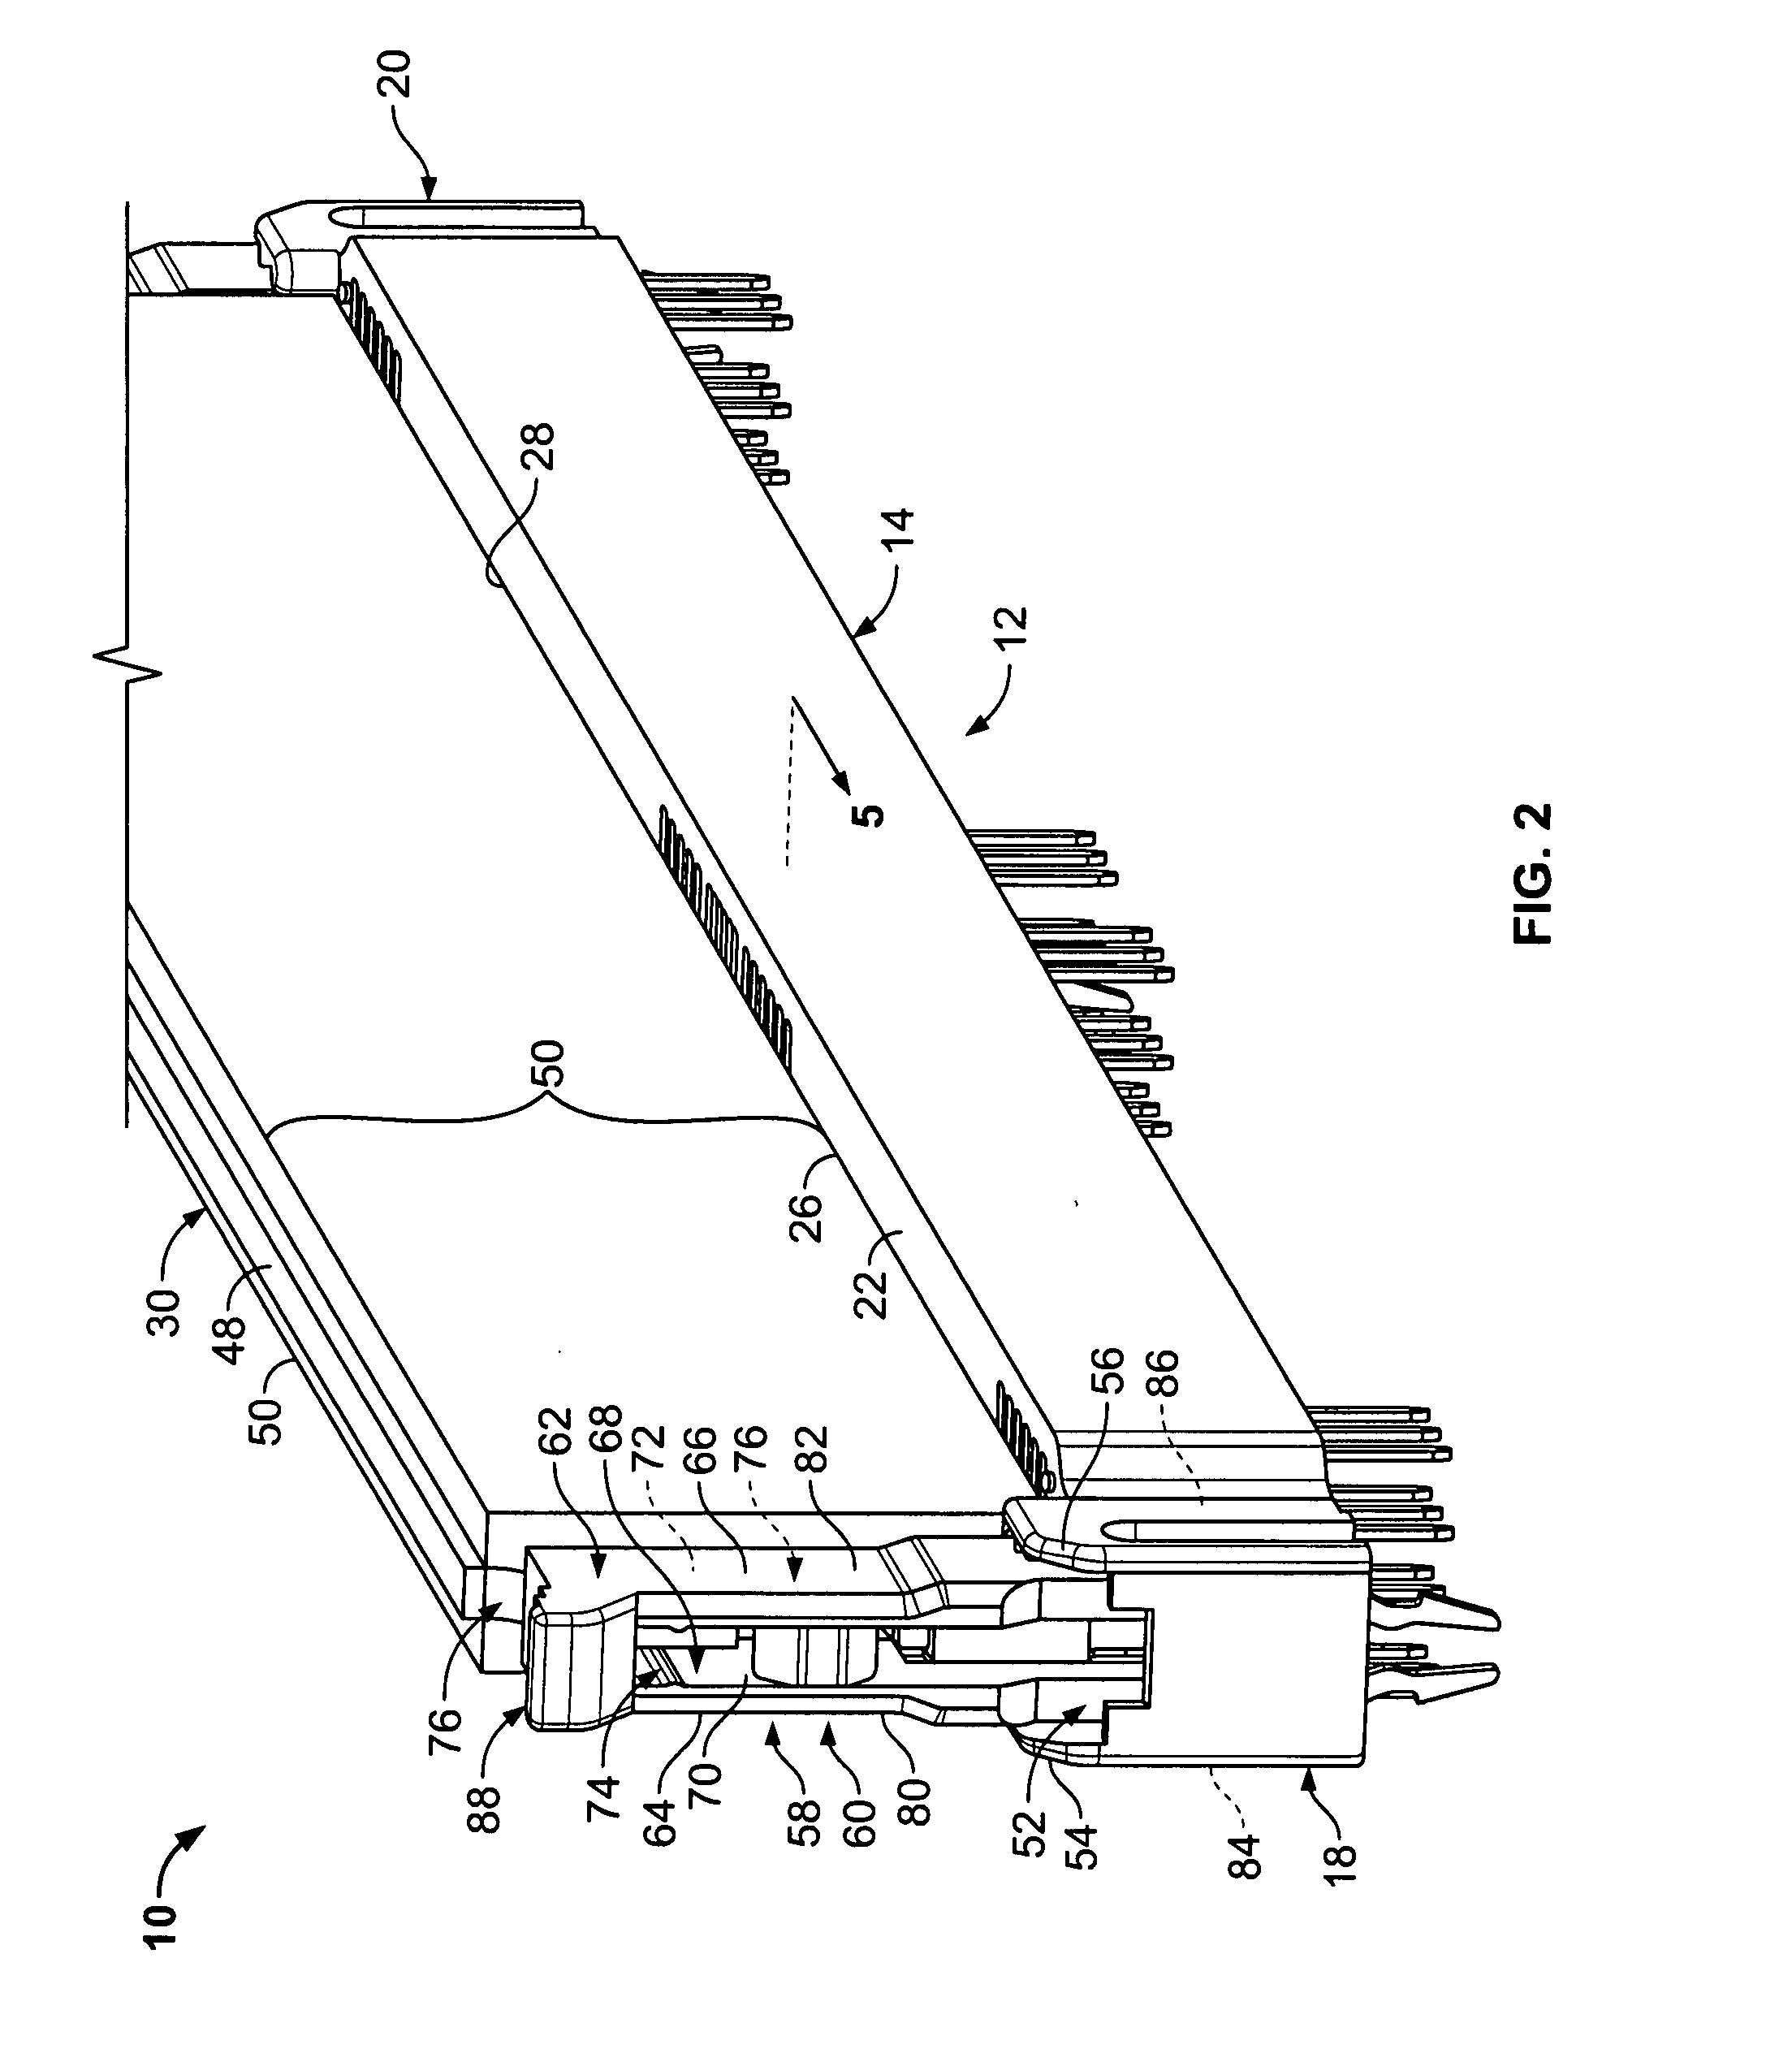 Electrical connector assembly with shorting contacts